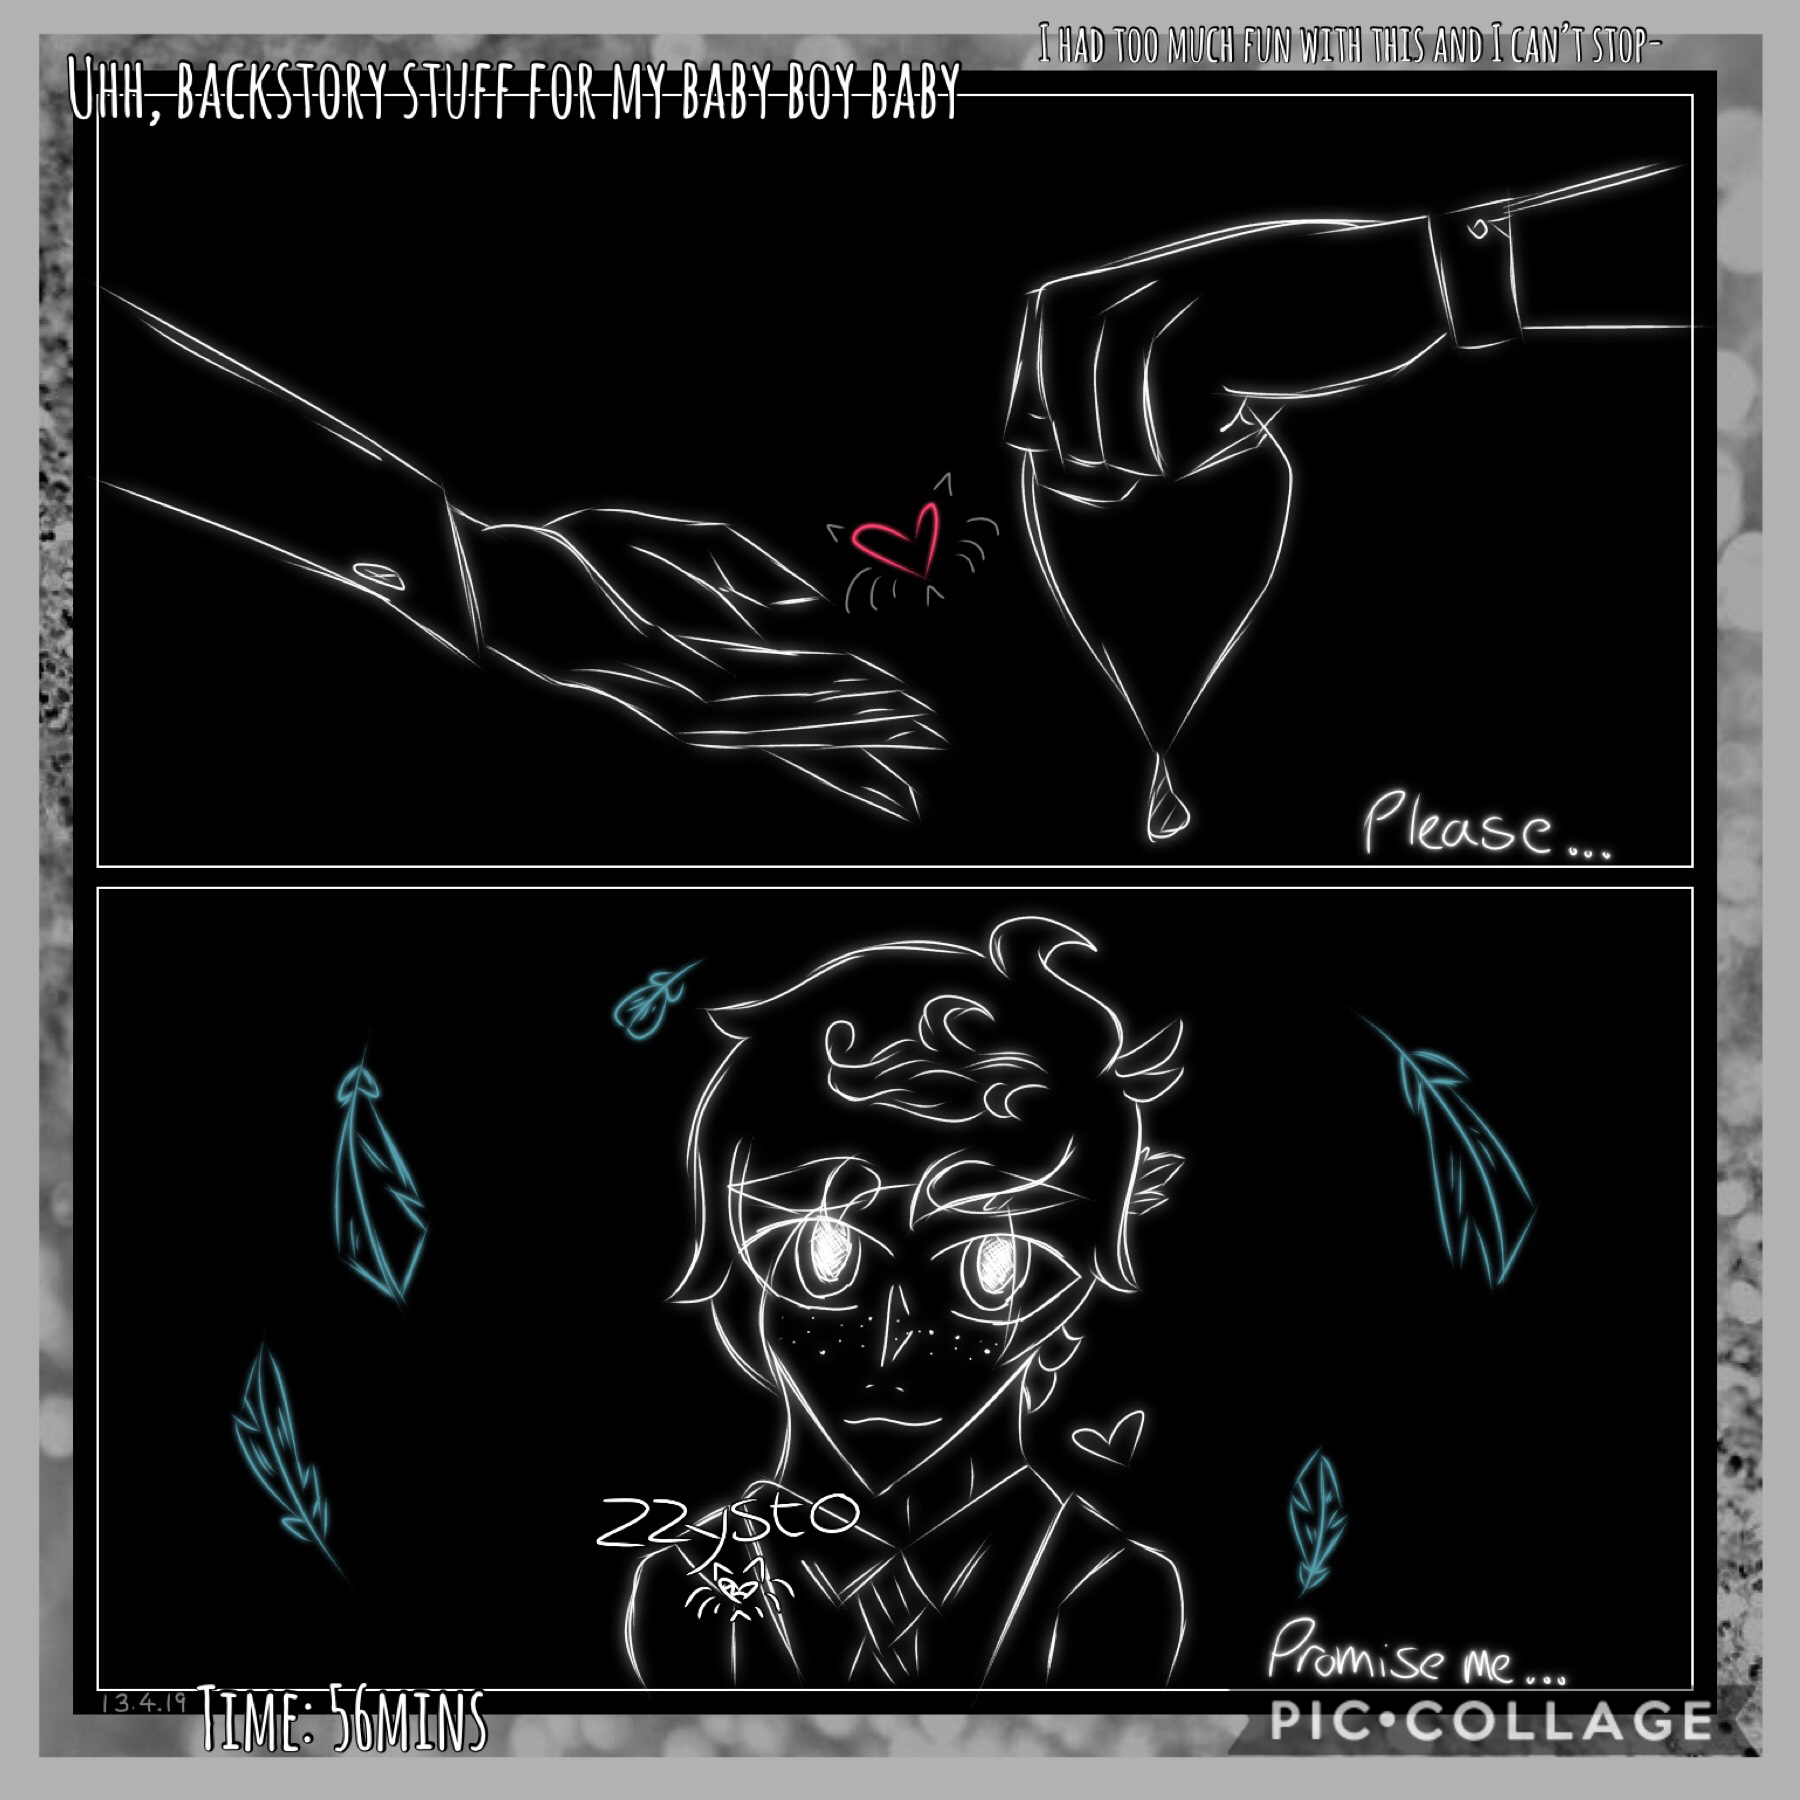 💫Tap💫
I know no one will, but feel free to make theories and guesses about this ((Charles’ backstory)) if you want,, h
I’m bad at explaining lore and backstory stuff through art,, I’m sorry :’)
Oh, can we take a moment to appreciate those hAnds- they took